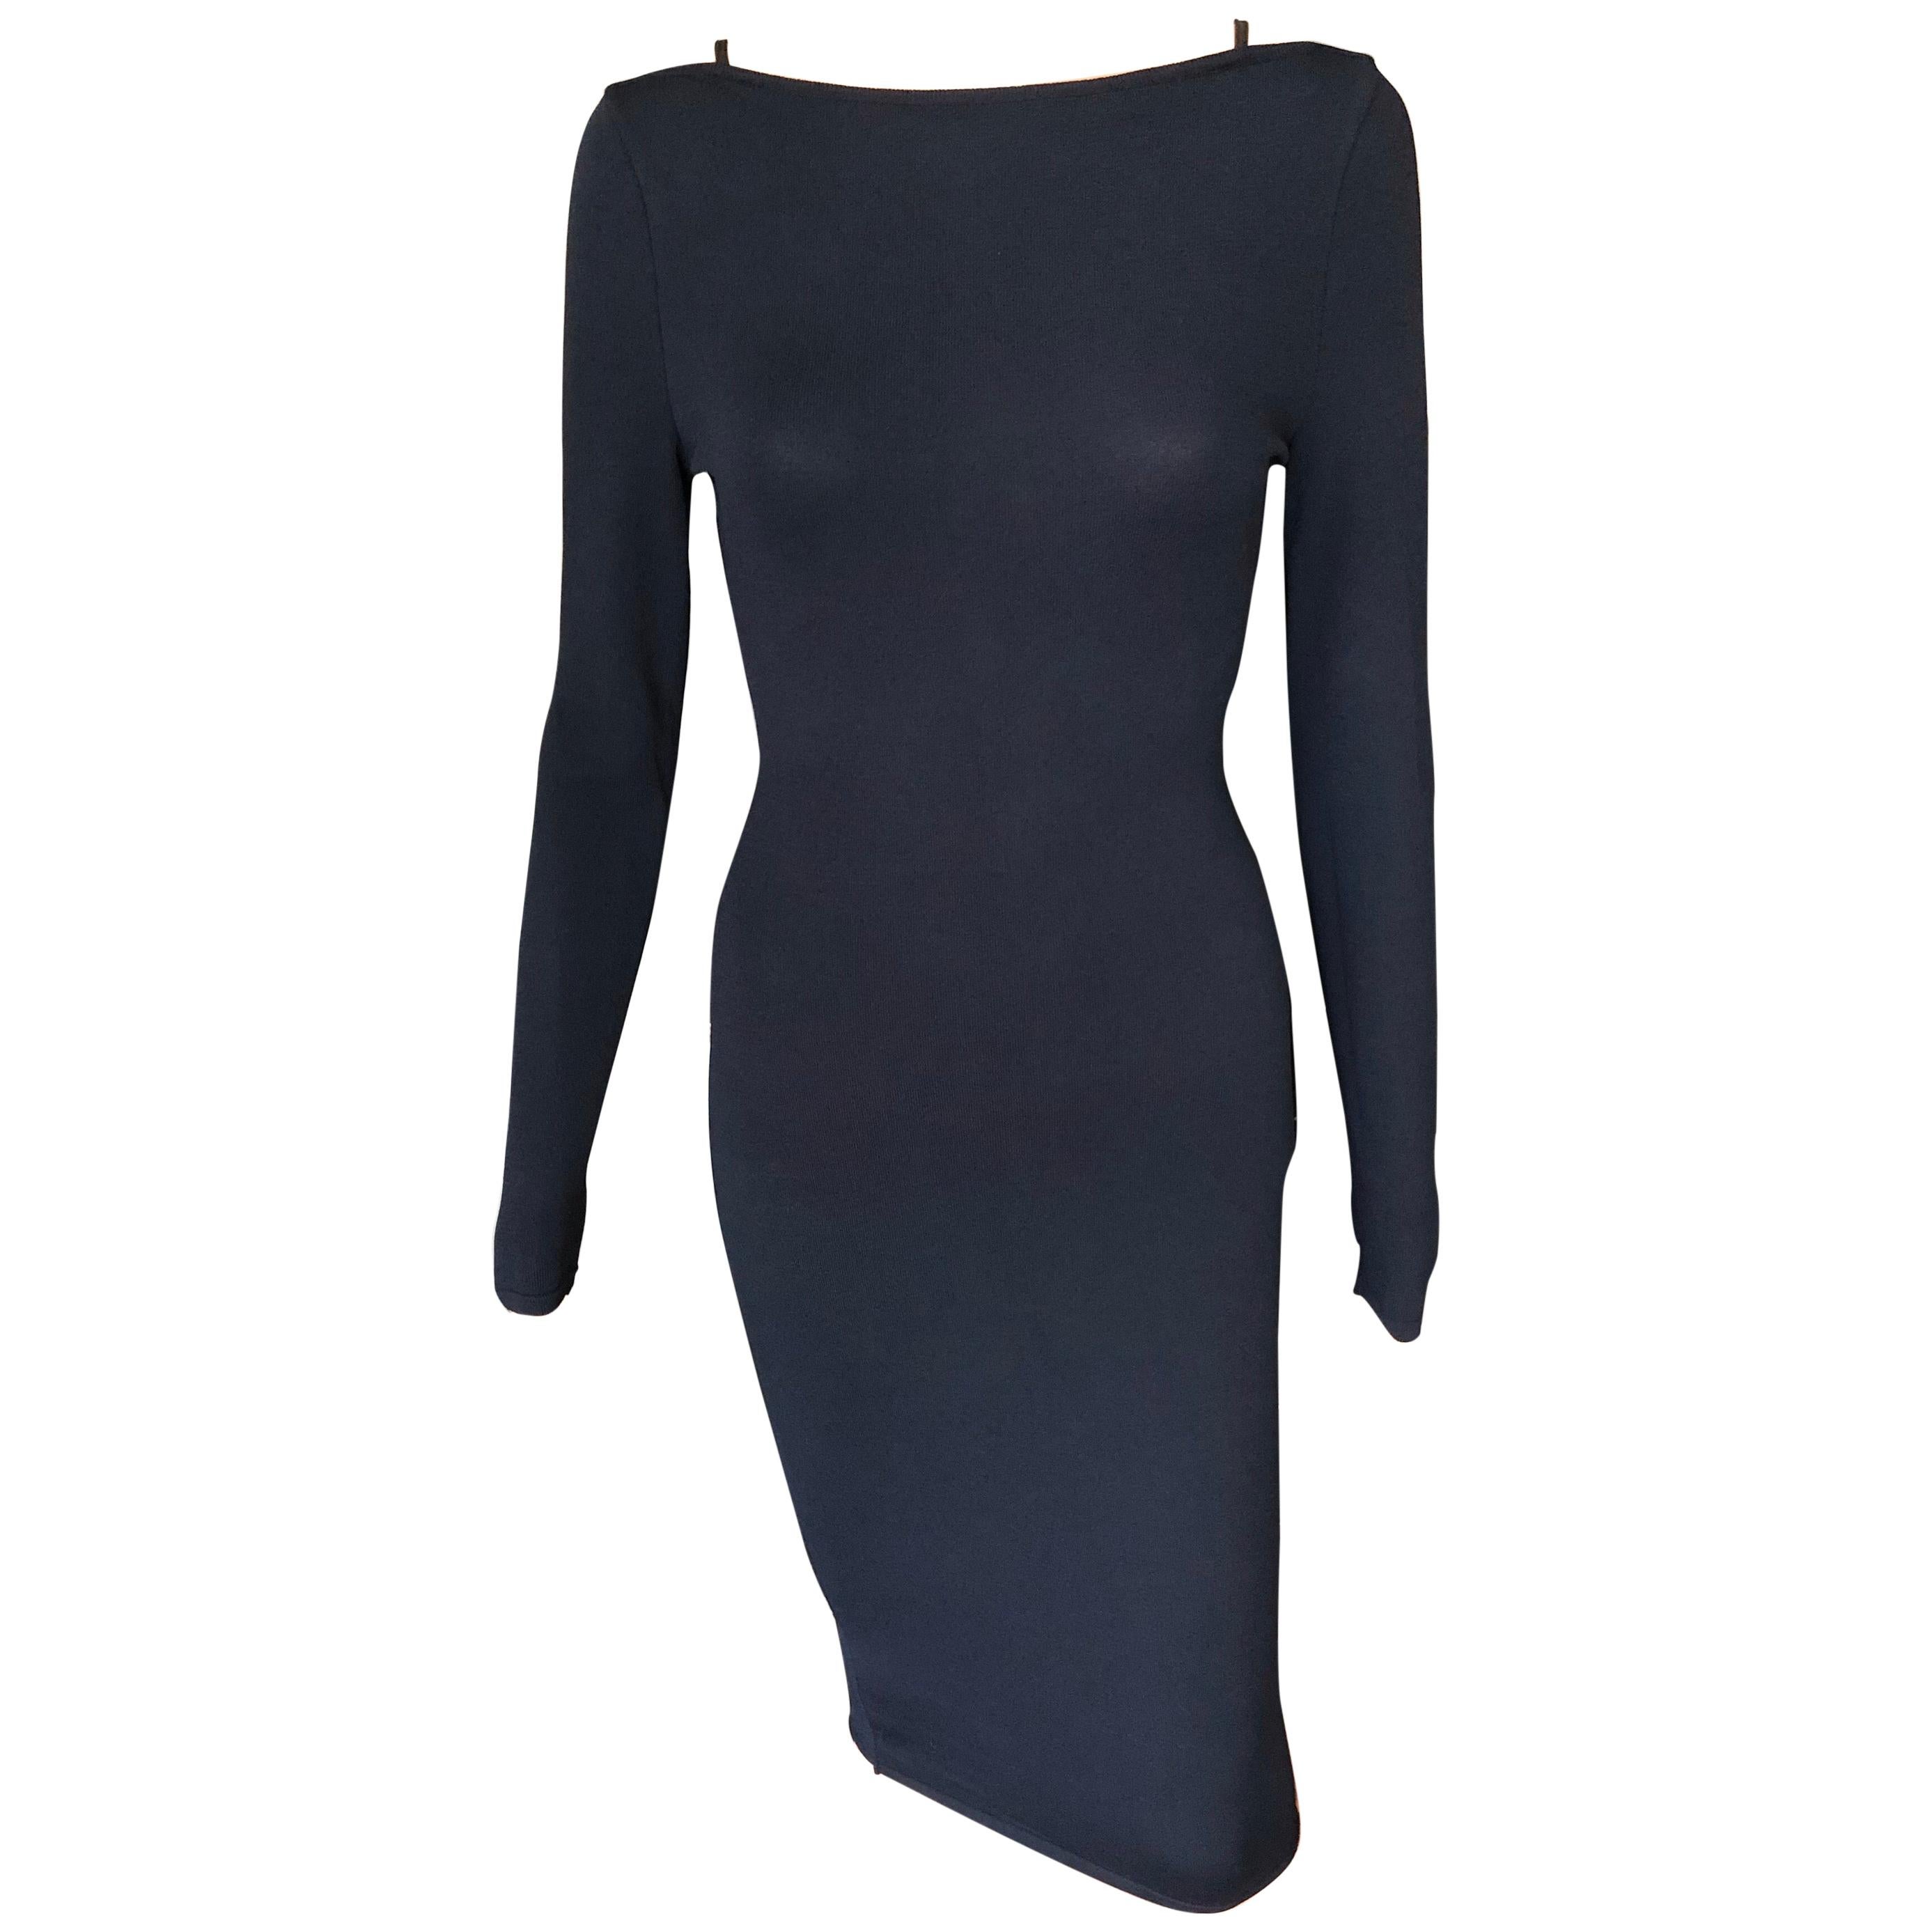 Tom Ford for Gucci S/S 1998 Vintage Bodycon Knit Midi Dress